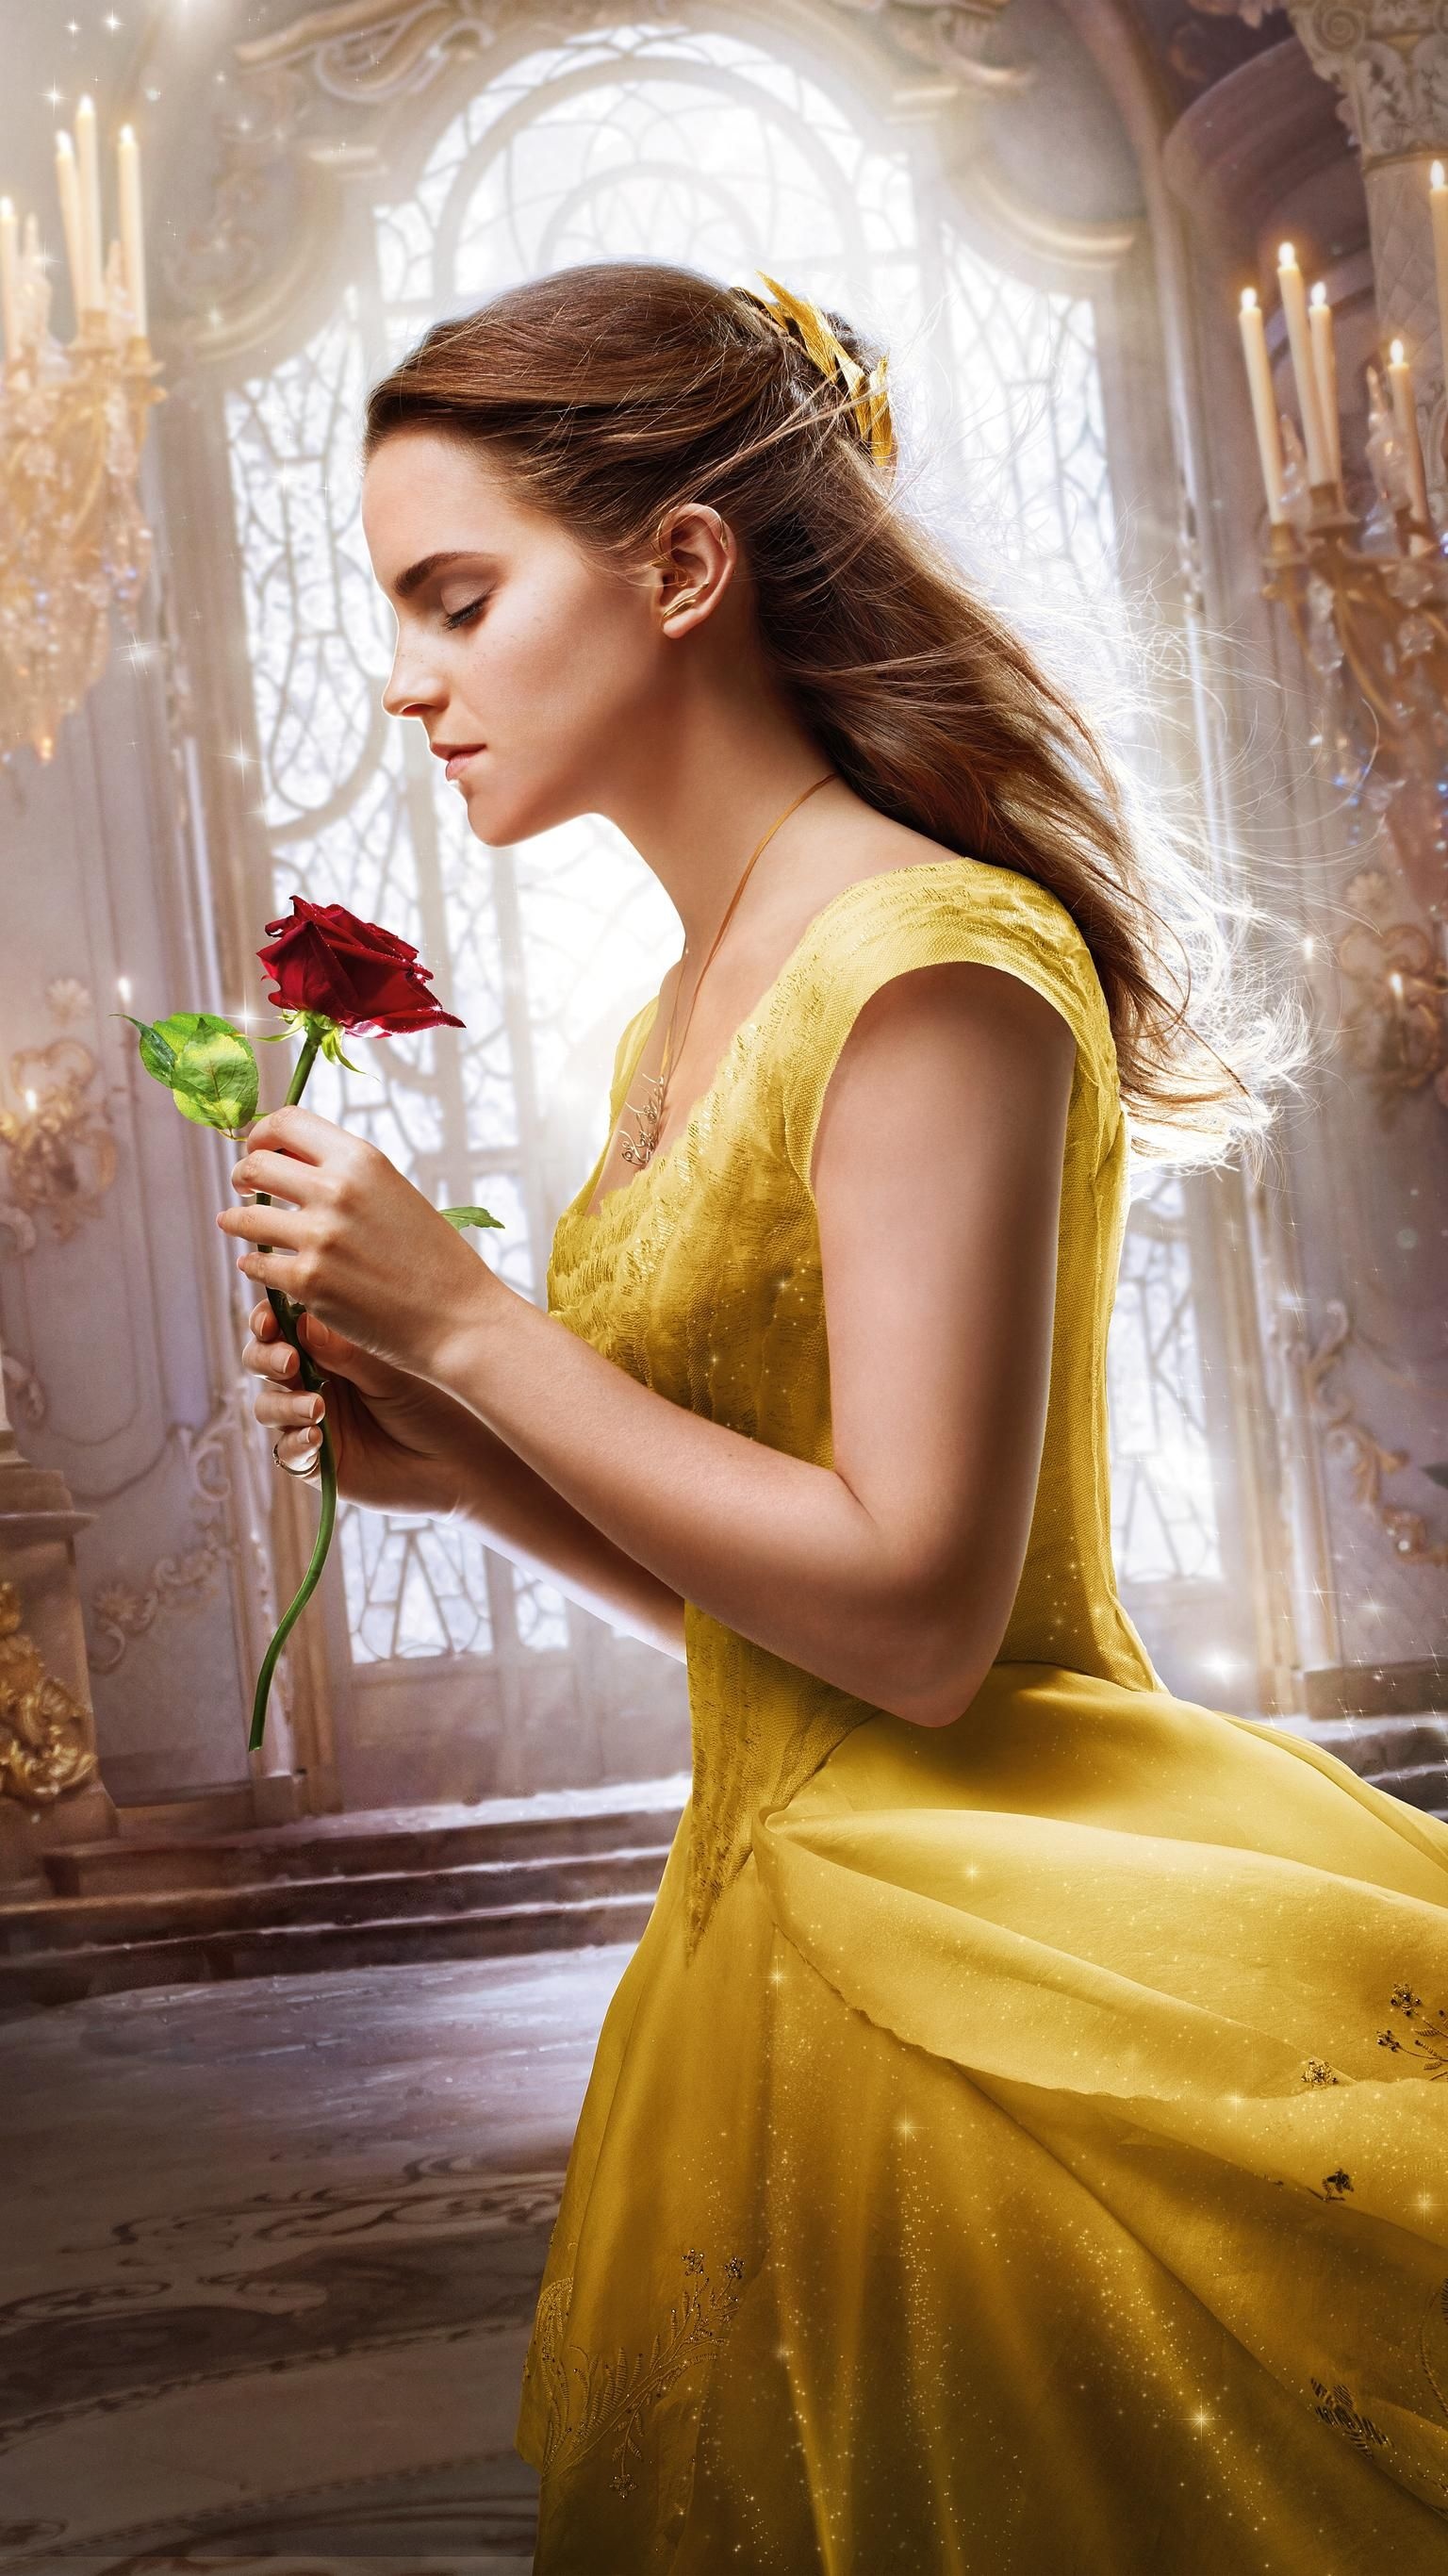 Beauty and the Beast movie, Phone wallpaper, Emma Watson as Belle, Movie mania, 1540x2740 HD Phone